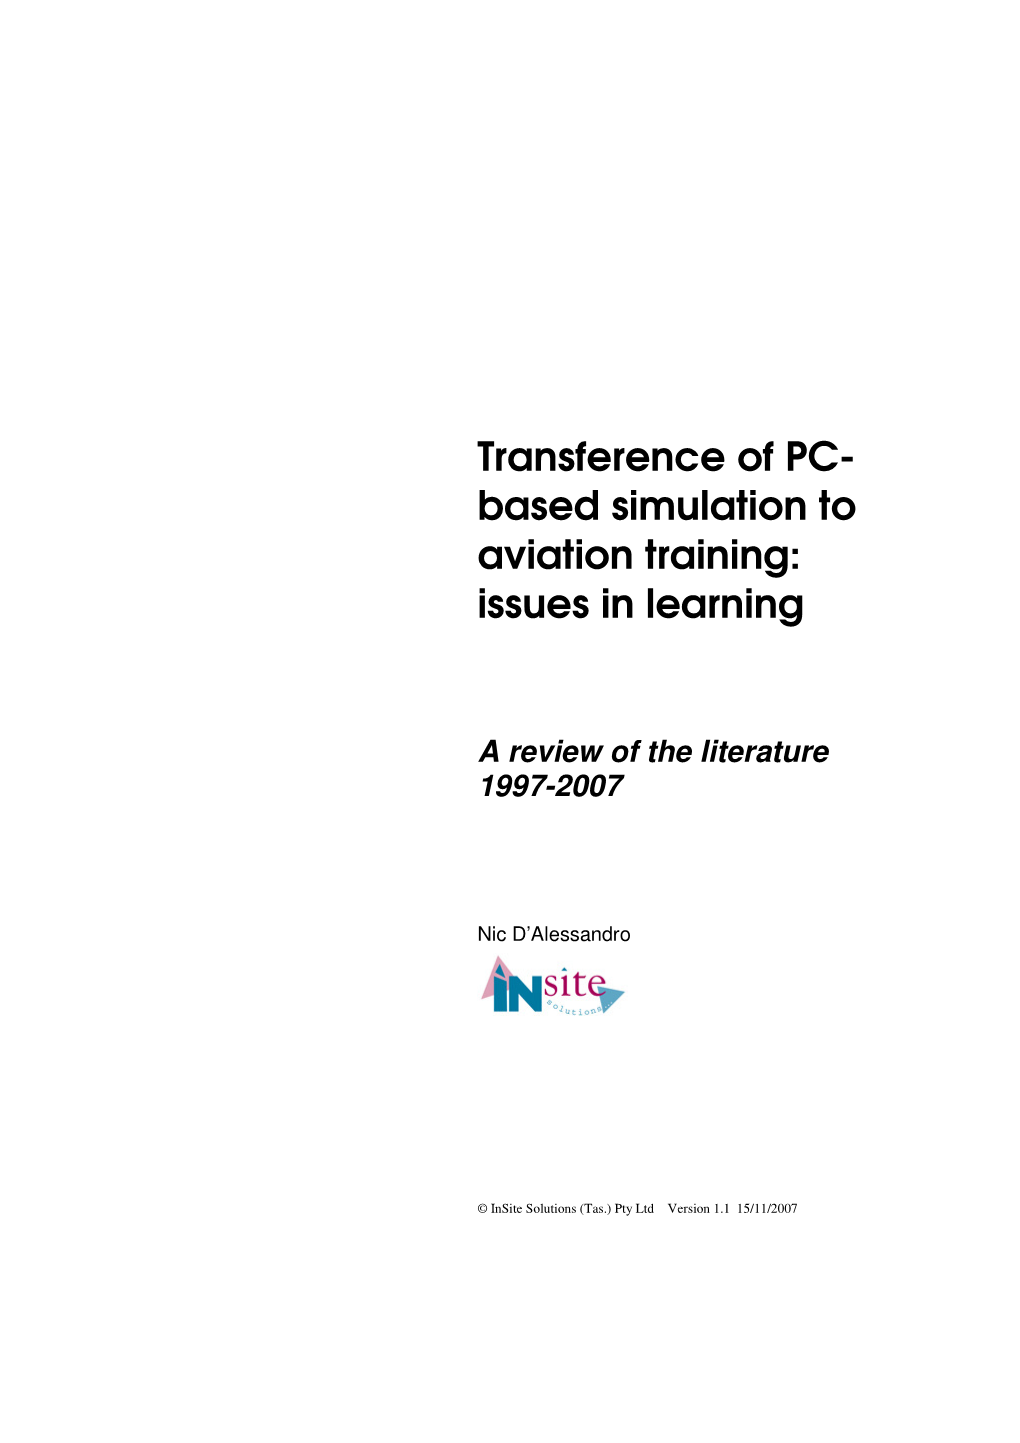 Transference of PC- Based Simulation to Aviation Training: Issues in Learning